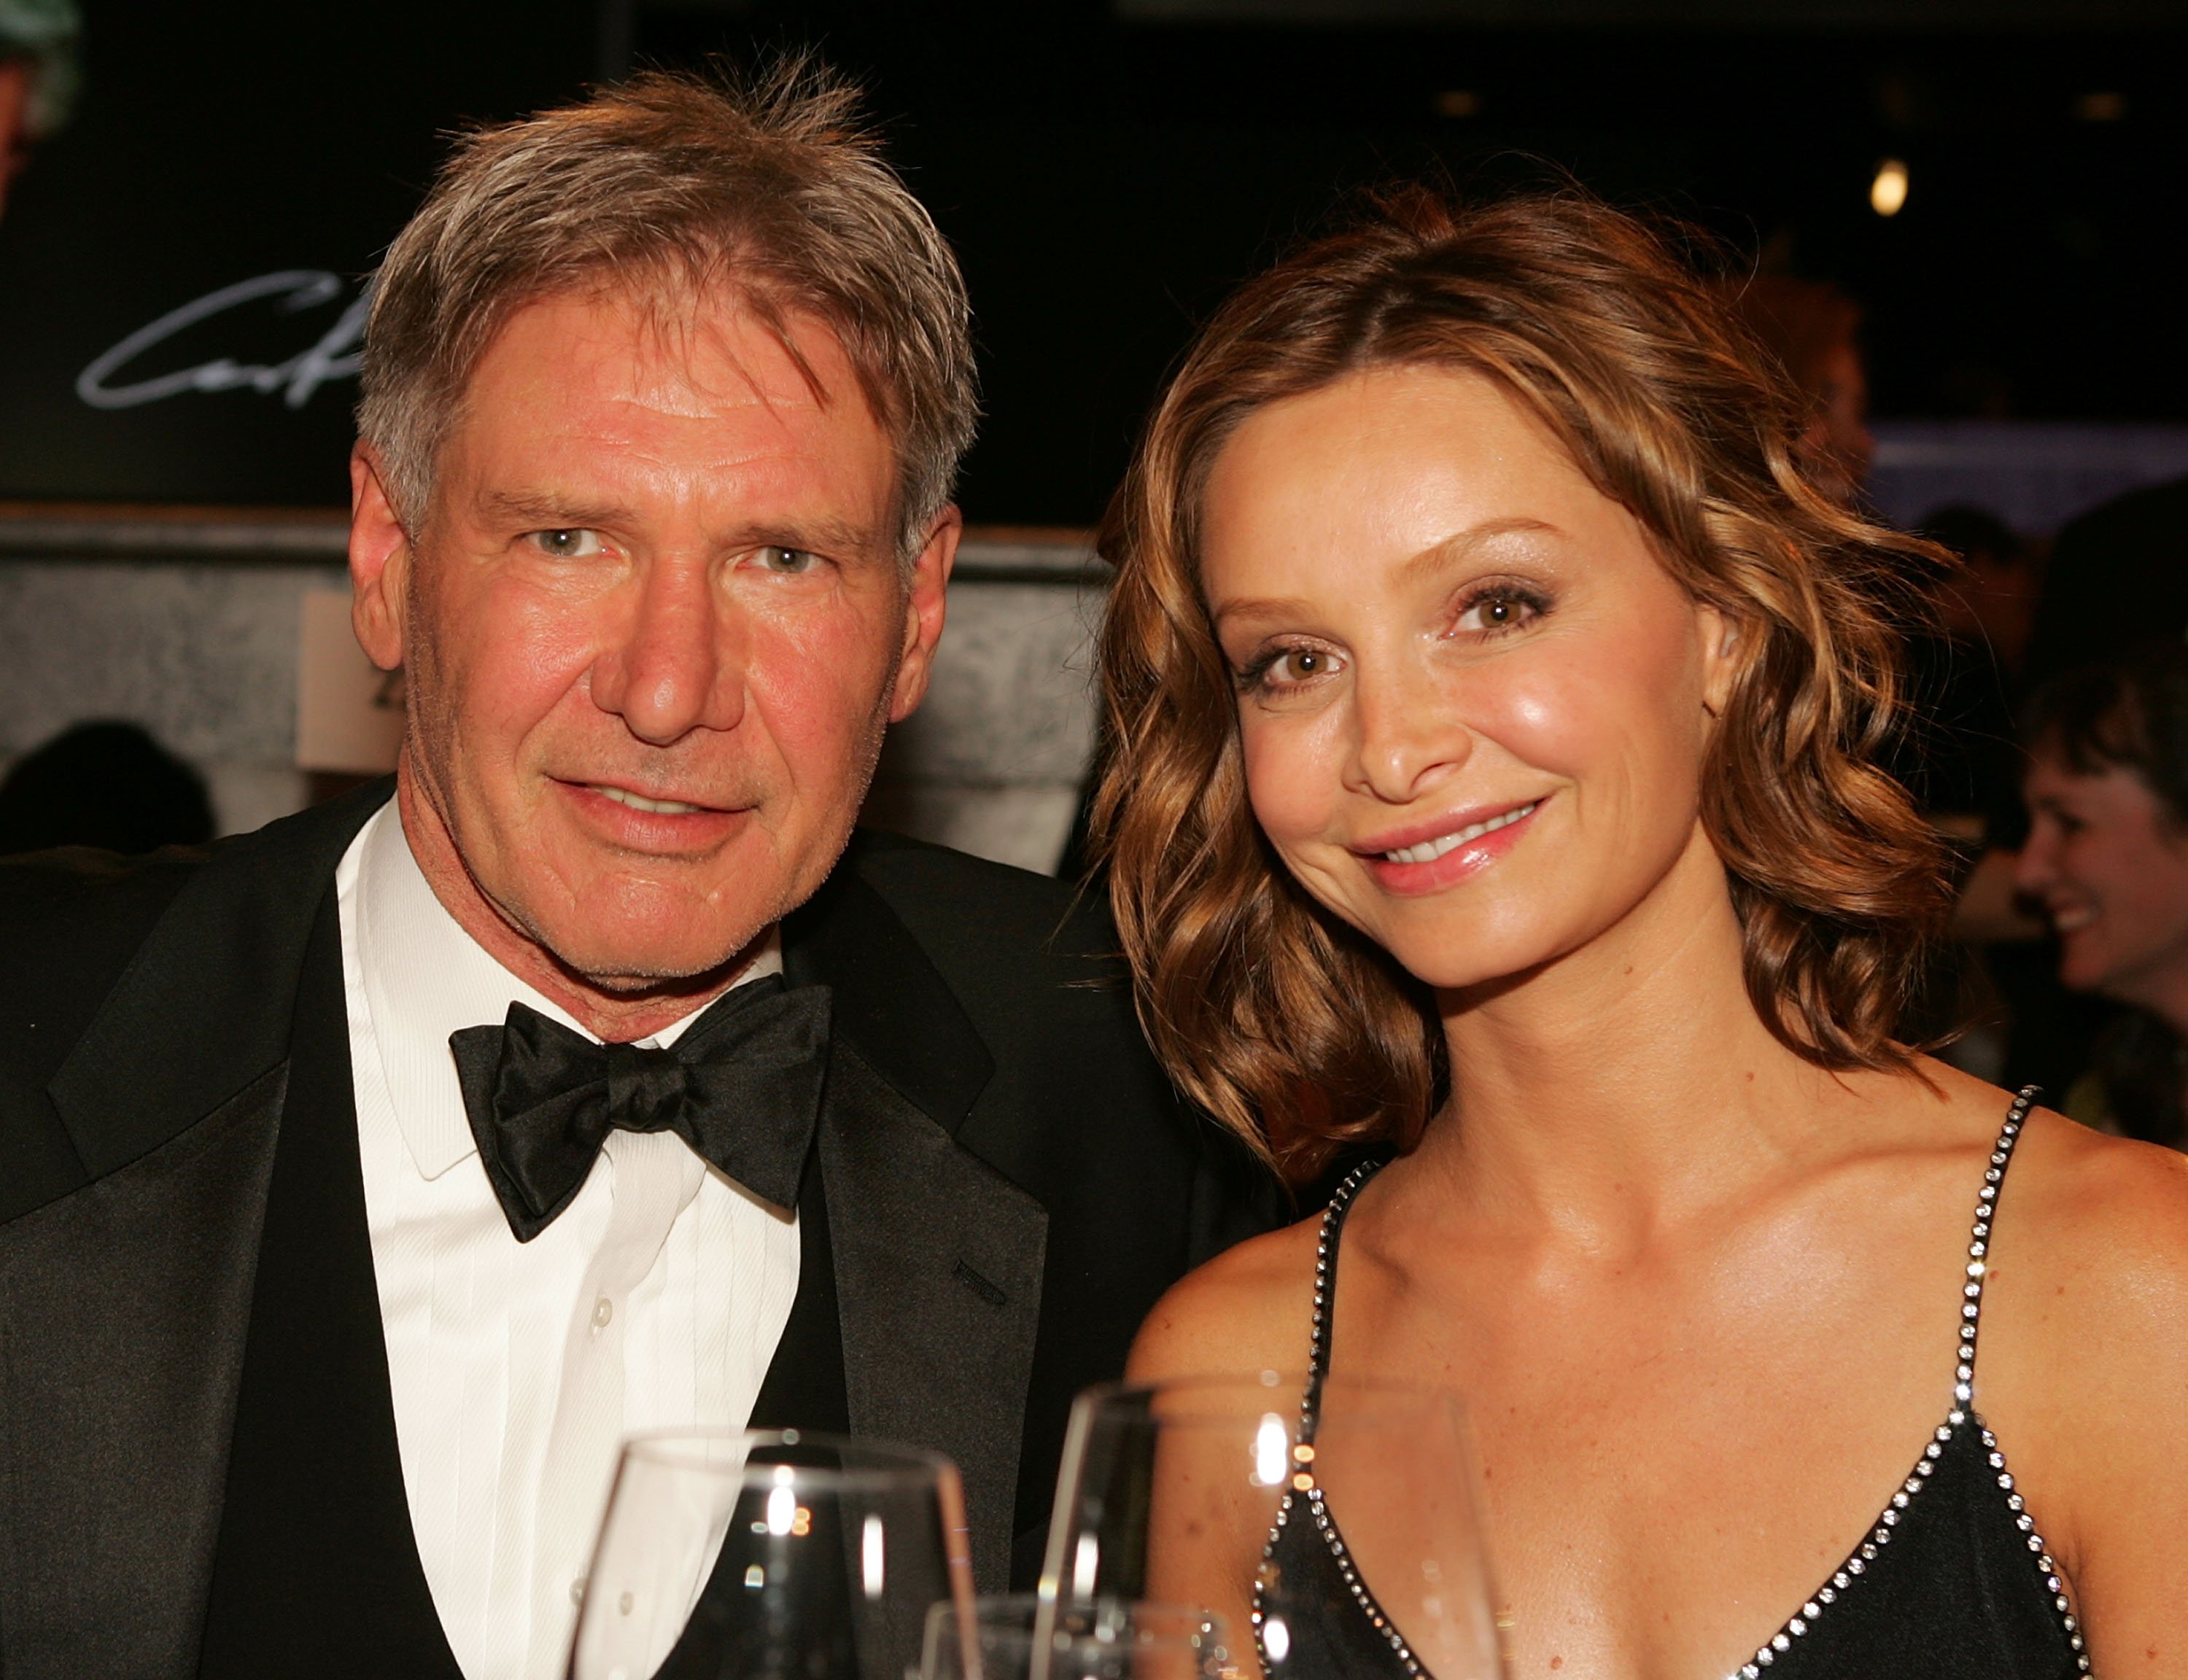 Actors Harrison Ford and Calista Flockhart pose during the 33rd AFI Life Achievement Award tribute to George Lucas at the Kodak Theatre on June 9, 2005 in Hollywood, California.| Source: Getty Images